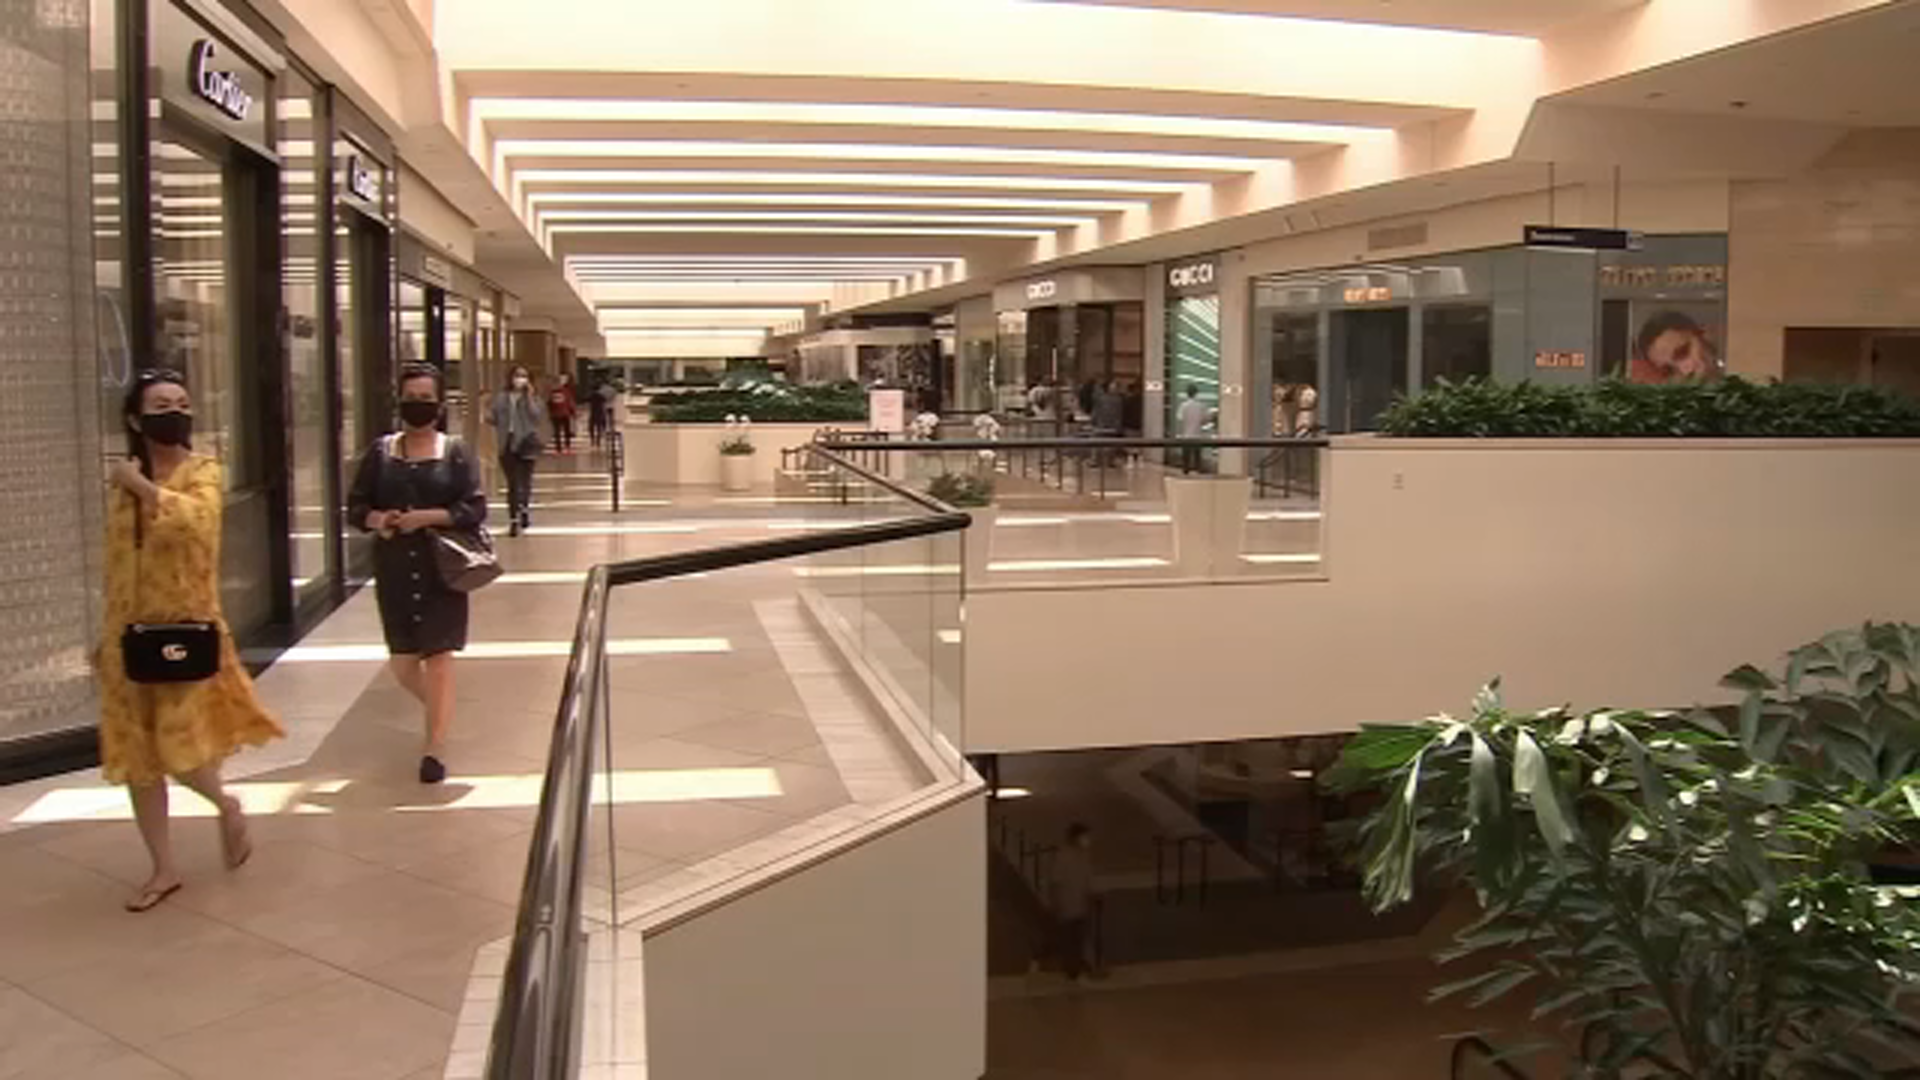 South Coast Plaza Mall is About to Close - SuperMall